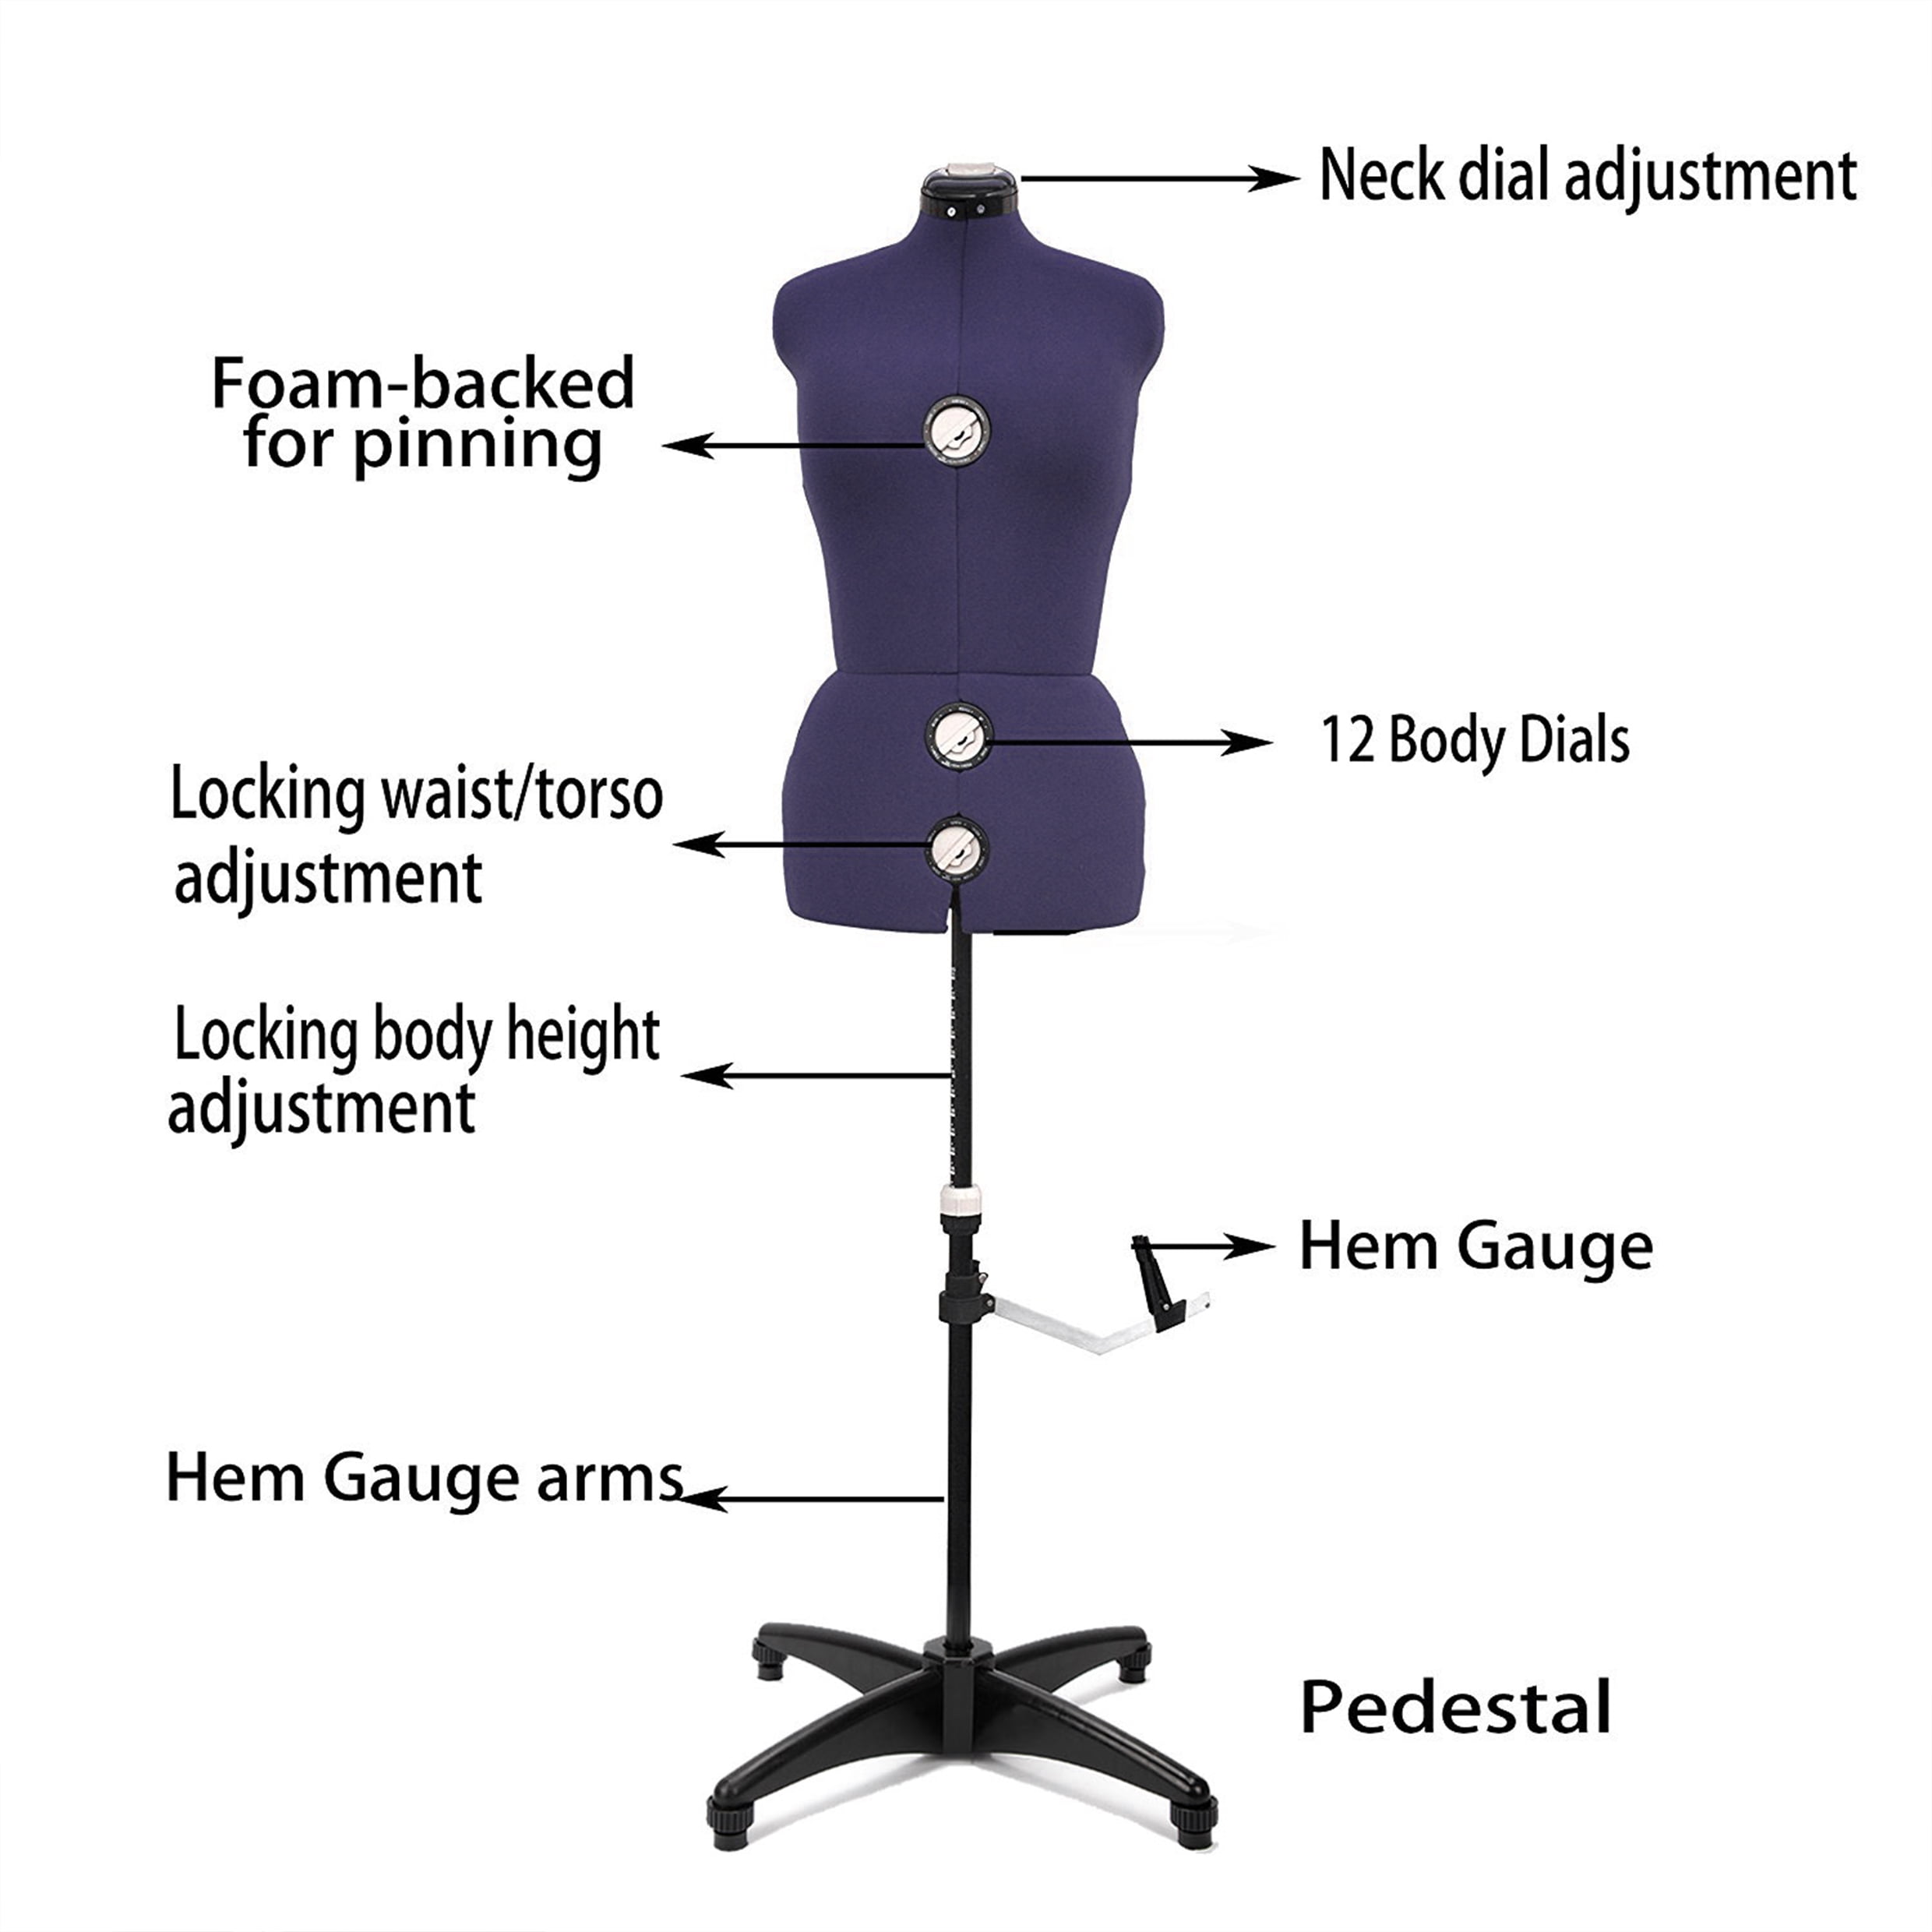 Dress Form Mannequin Base/stand With Matching Neck Cap BS 